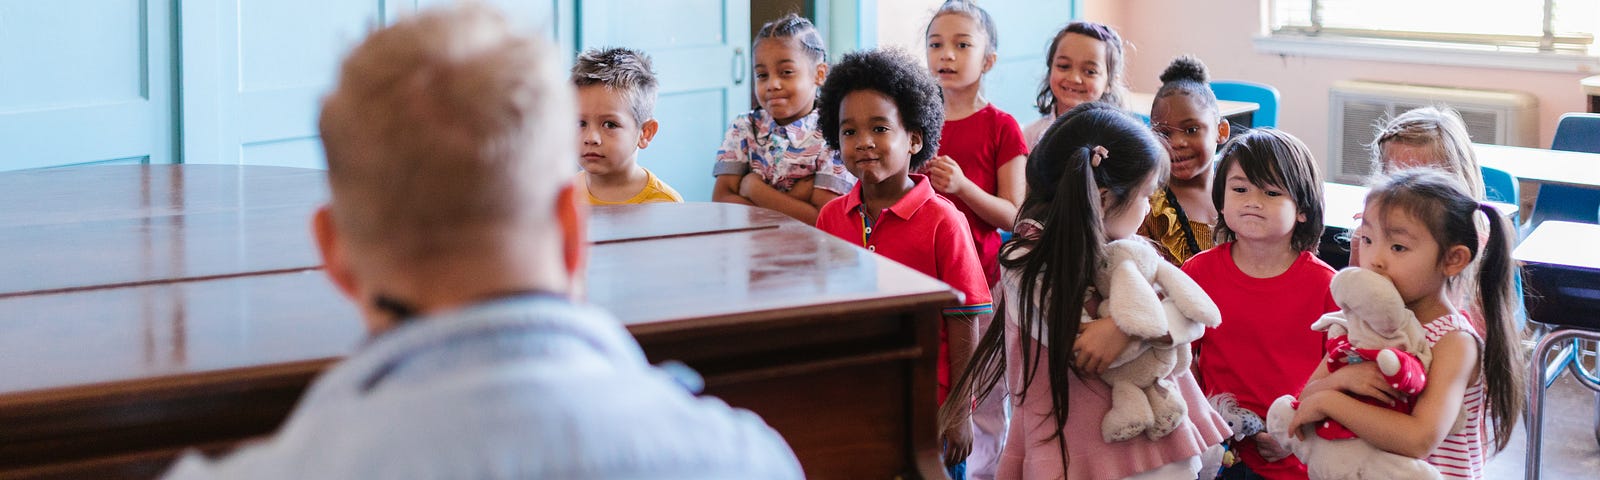 Children in a music classroom. They are standing in front of their desks and a male teacher is sitting at a grand piano.